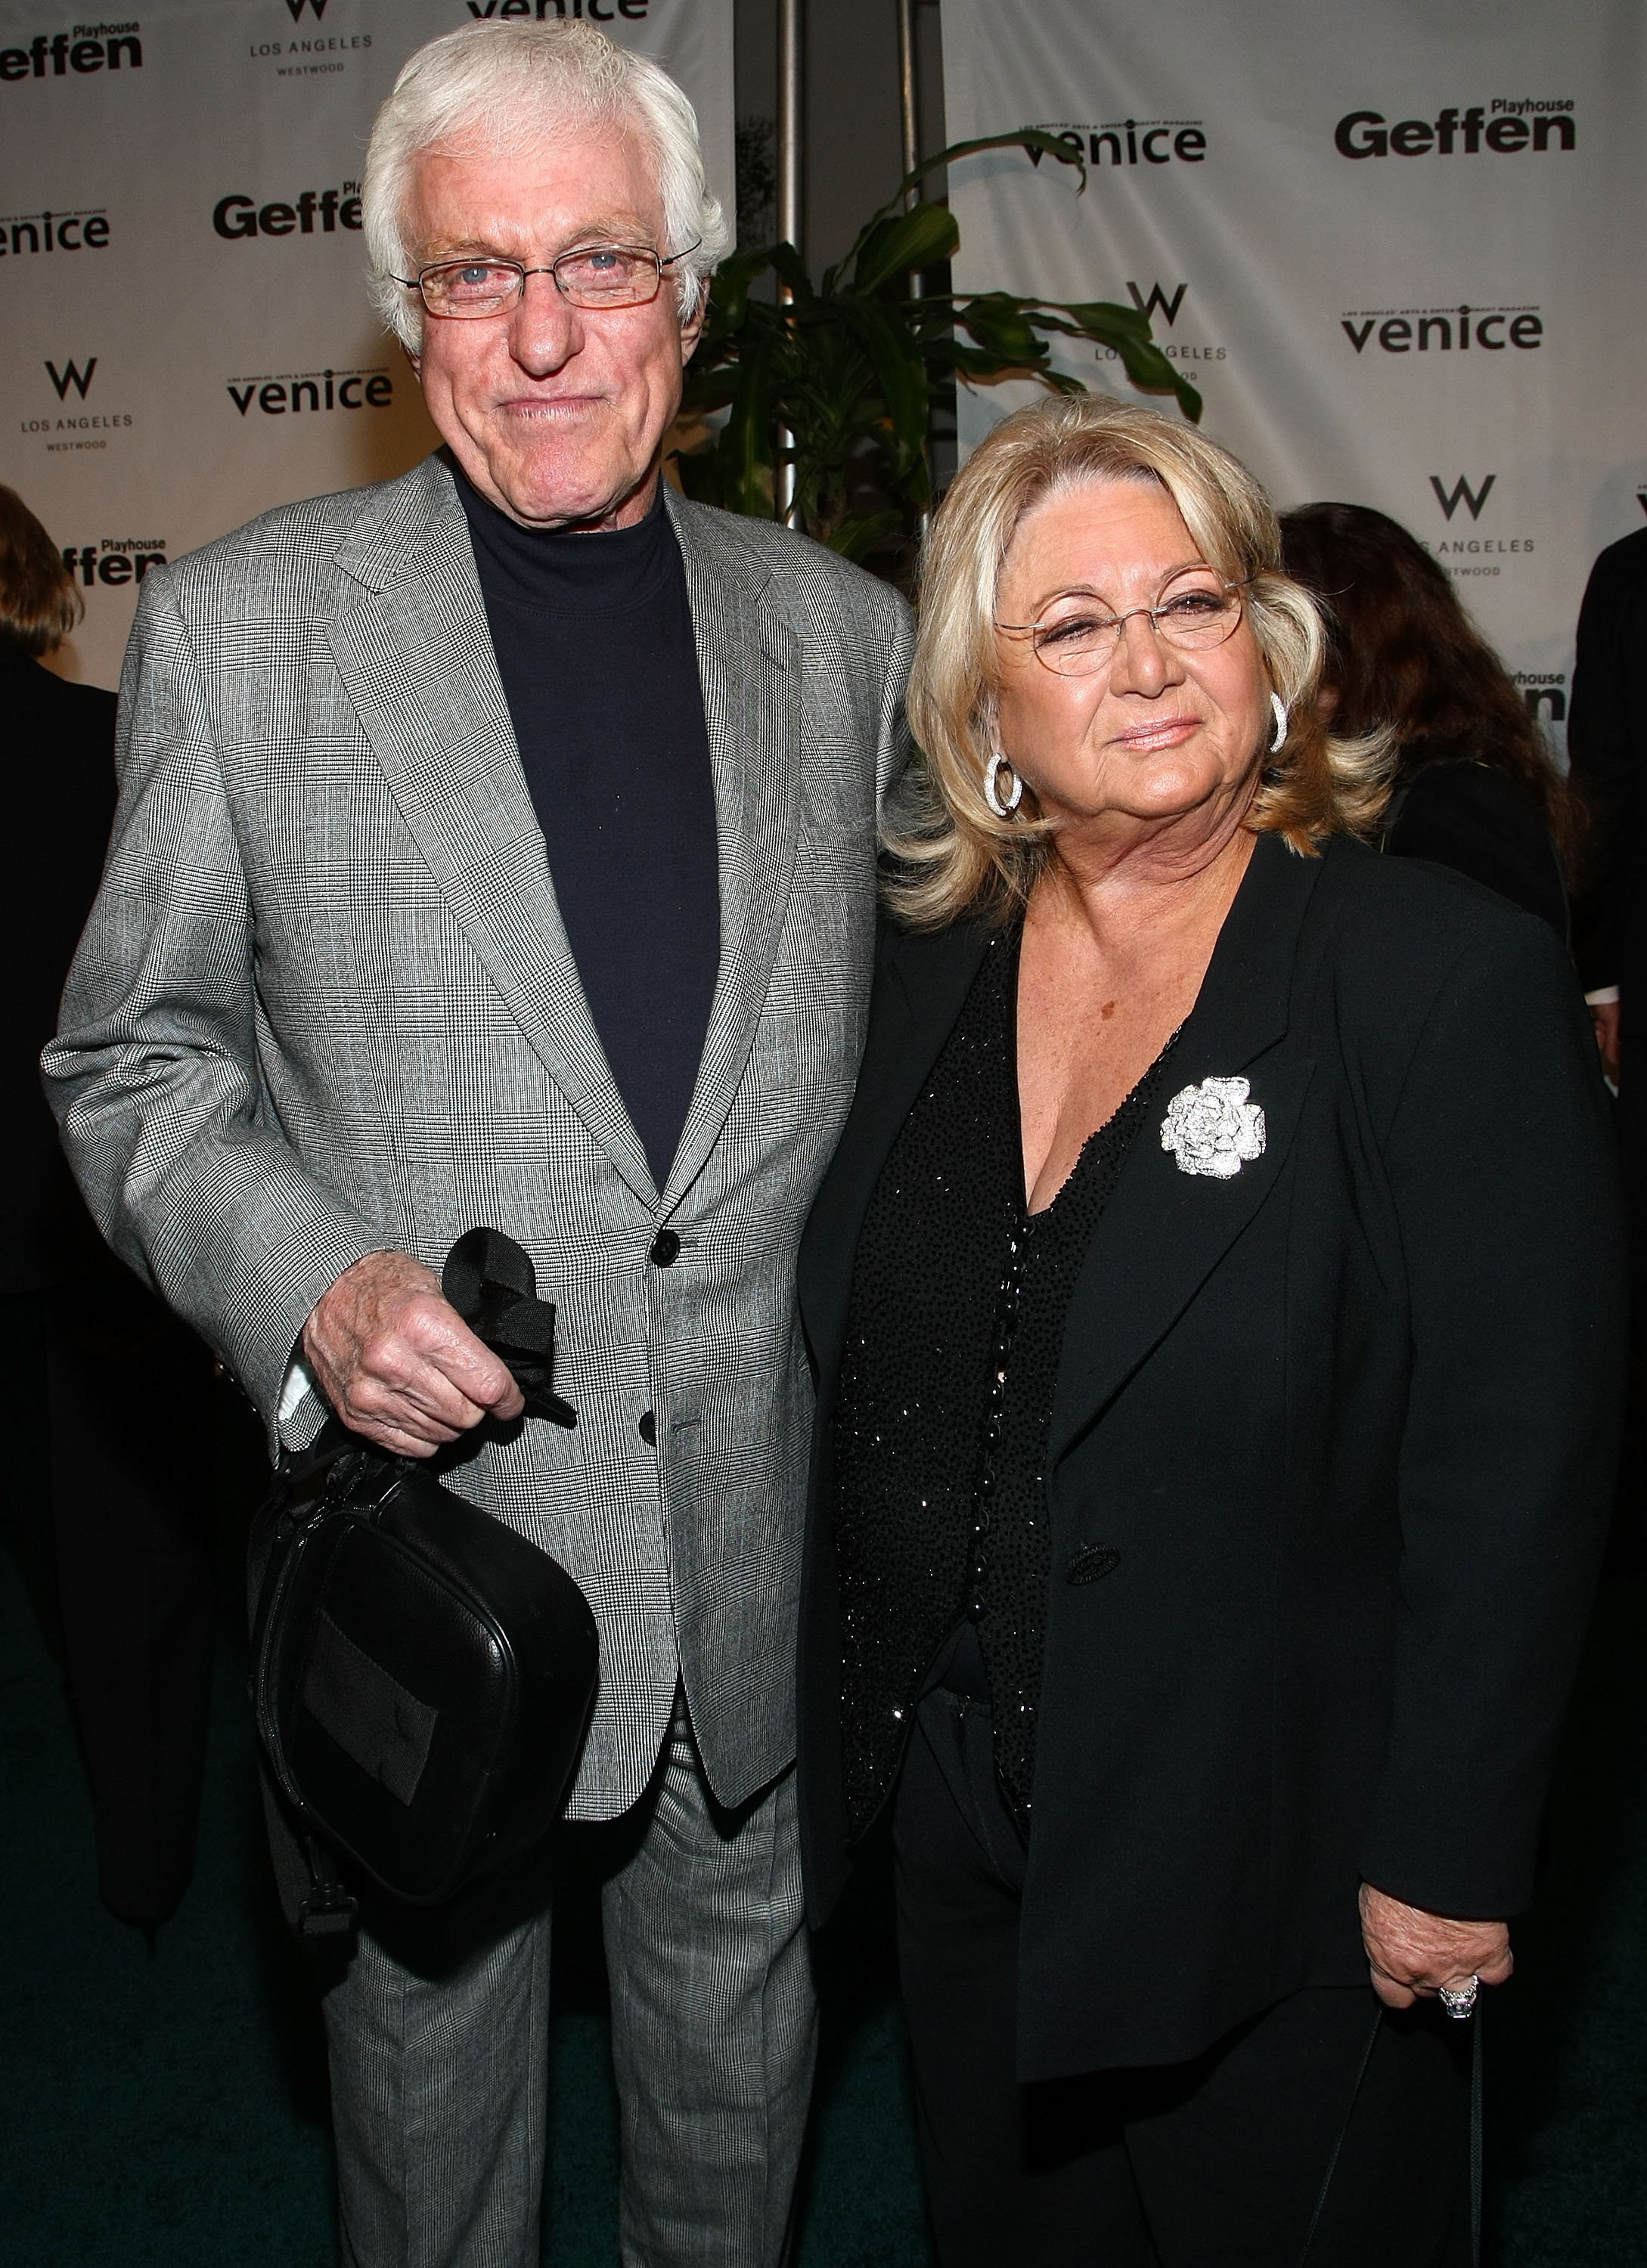 Dick Van Dyke and Michelle Triola arrive at the Geffen Playhouse's annual Backstage at the Geffen Gala on March 17, 2008 in Los Angeles, California | Source: Getty Images